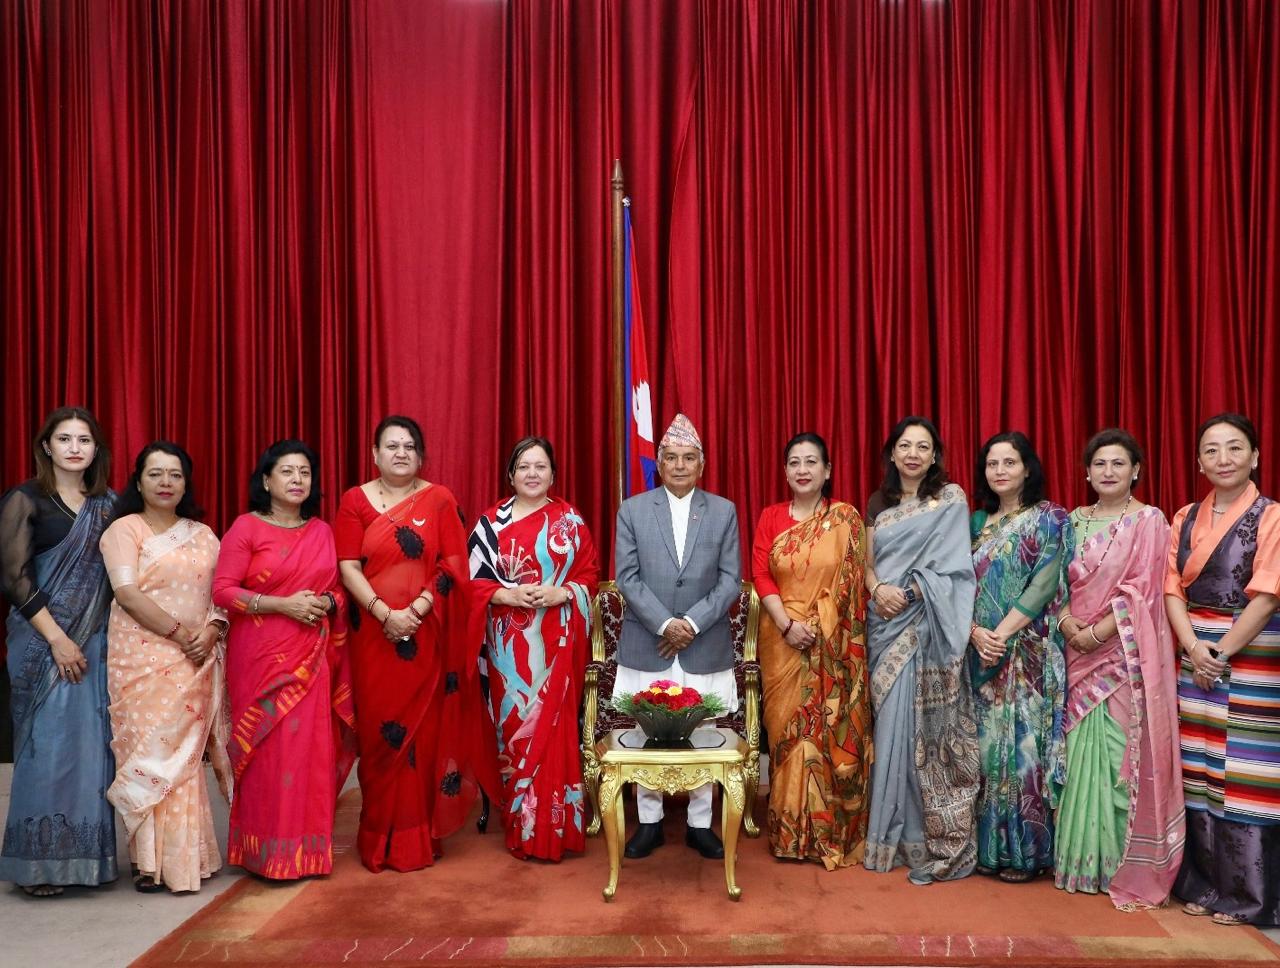 FWEAN meets with President Paudel to solicit support for women entrepreneurship